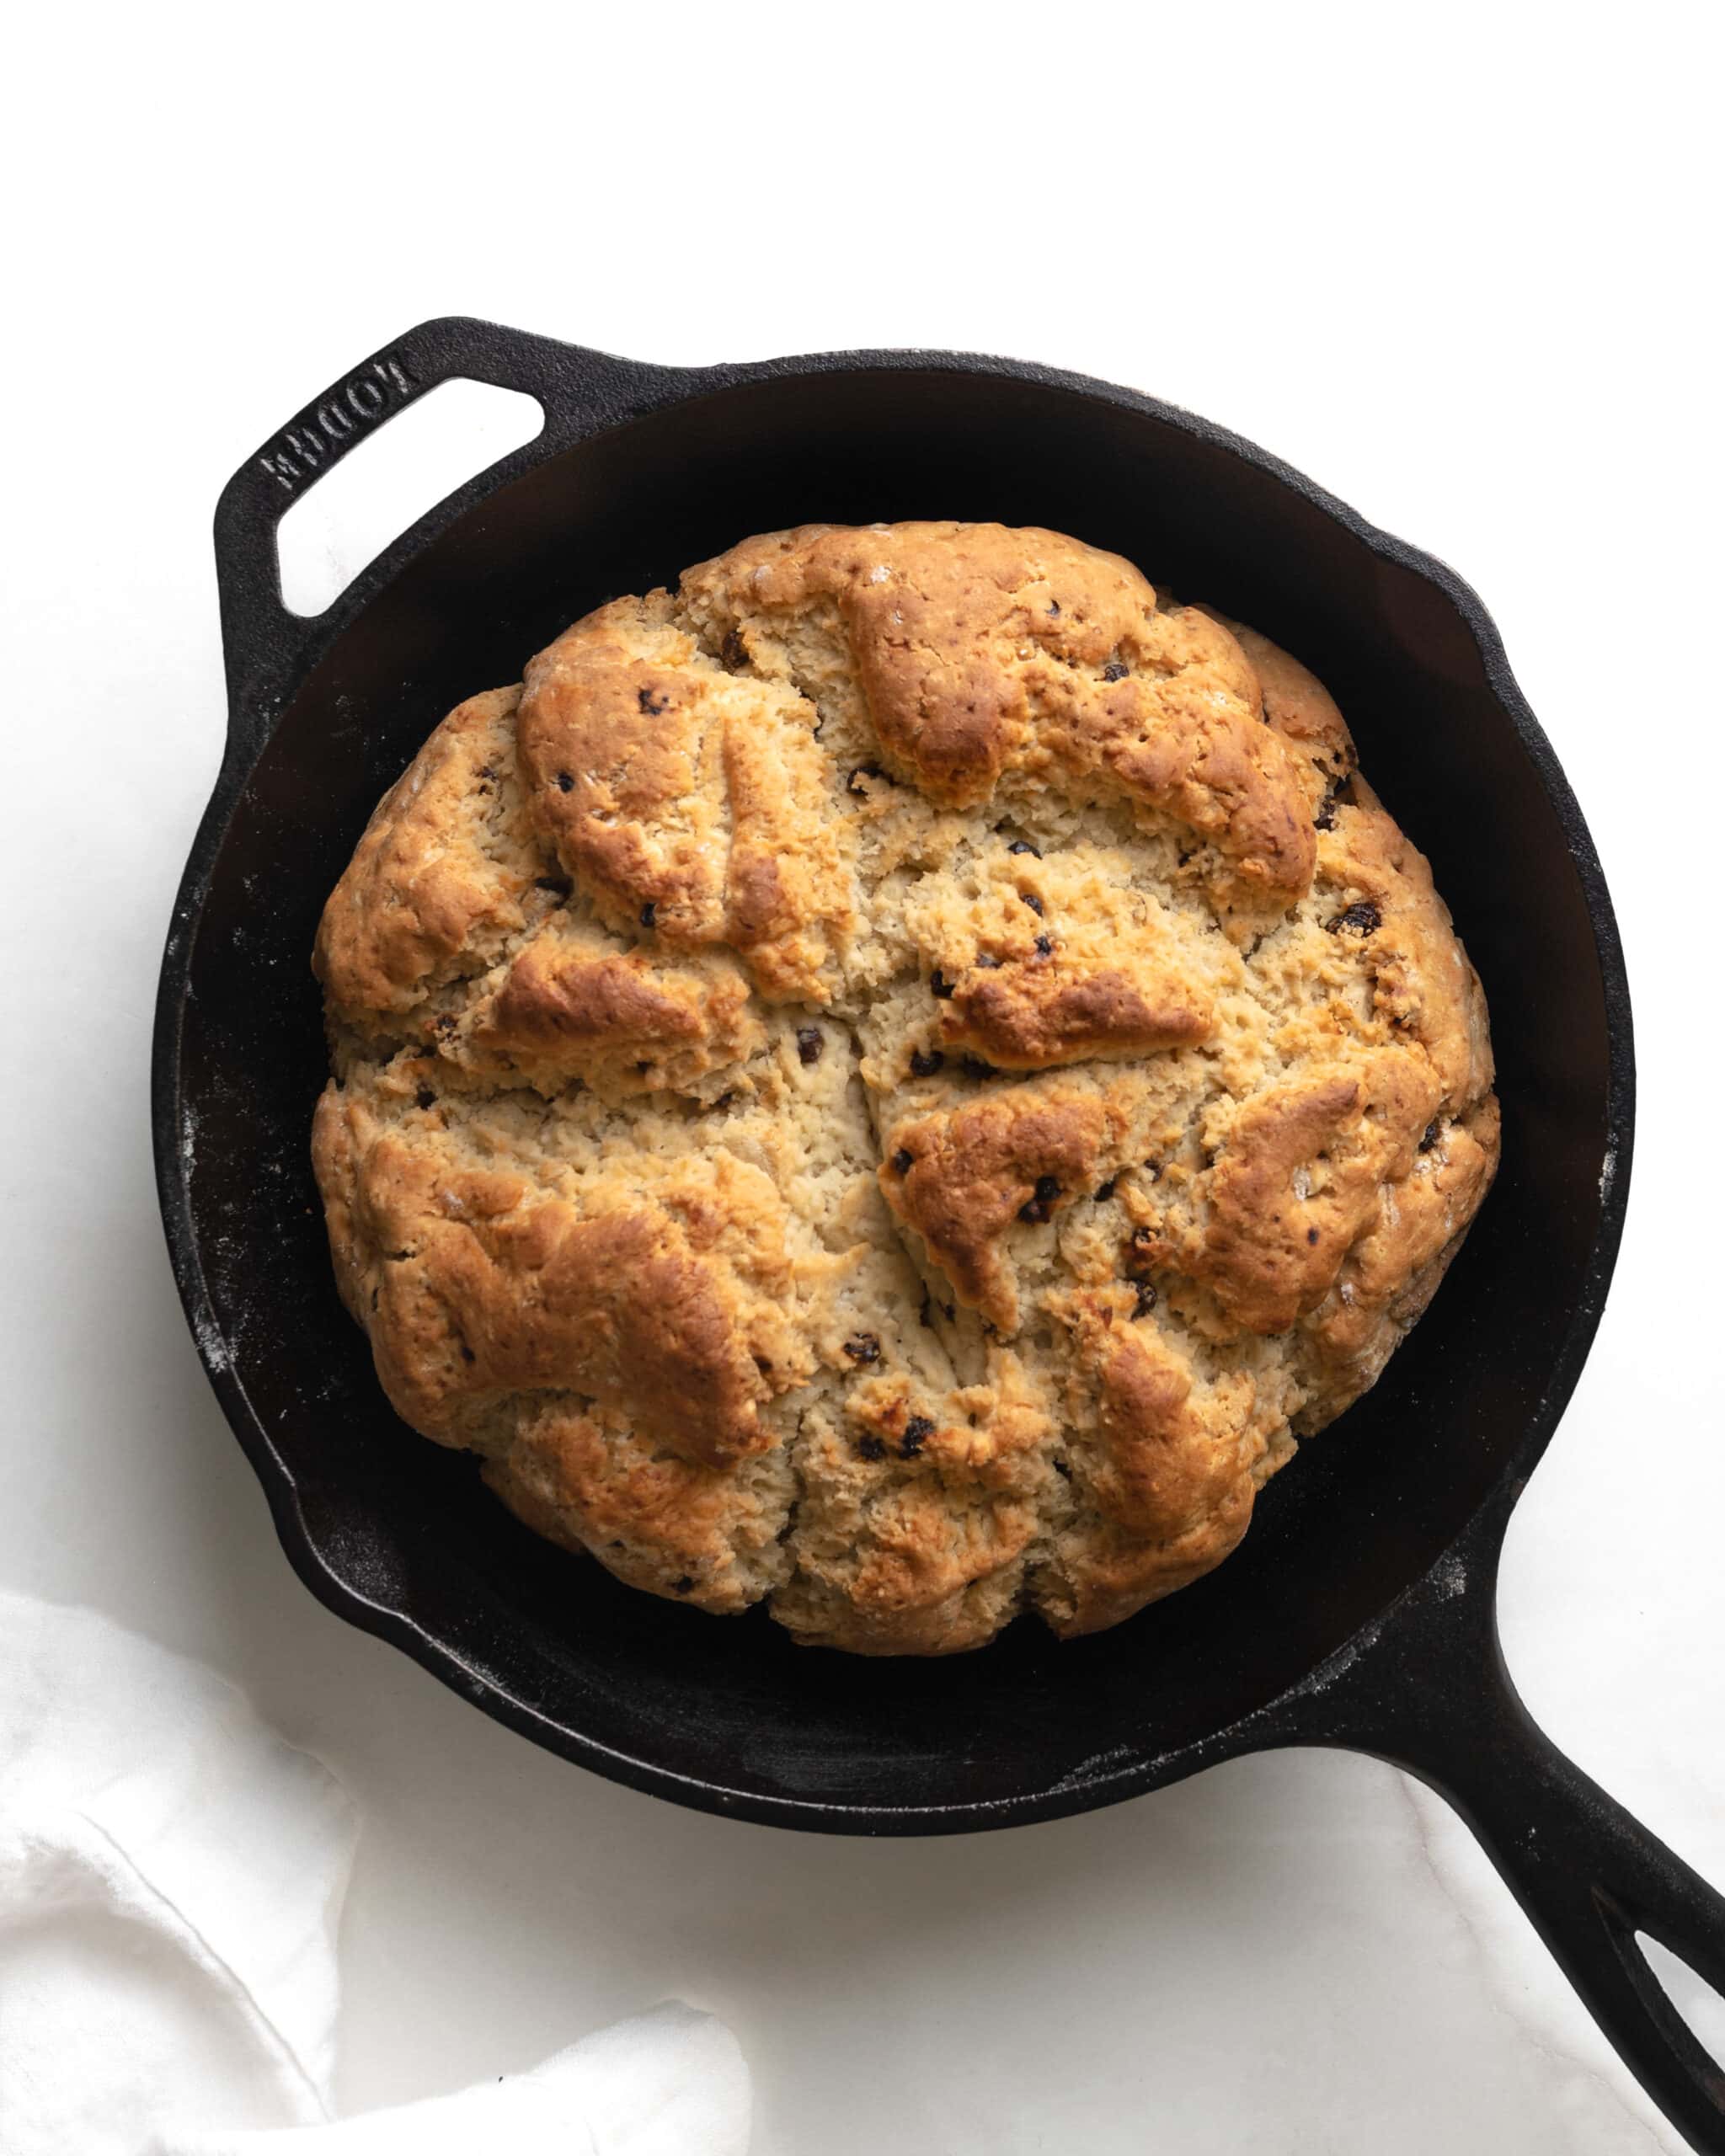 An overhead view of soda bread, baked in a cast iron skillet.